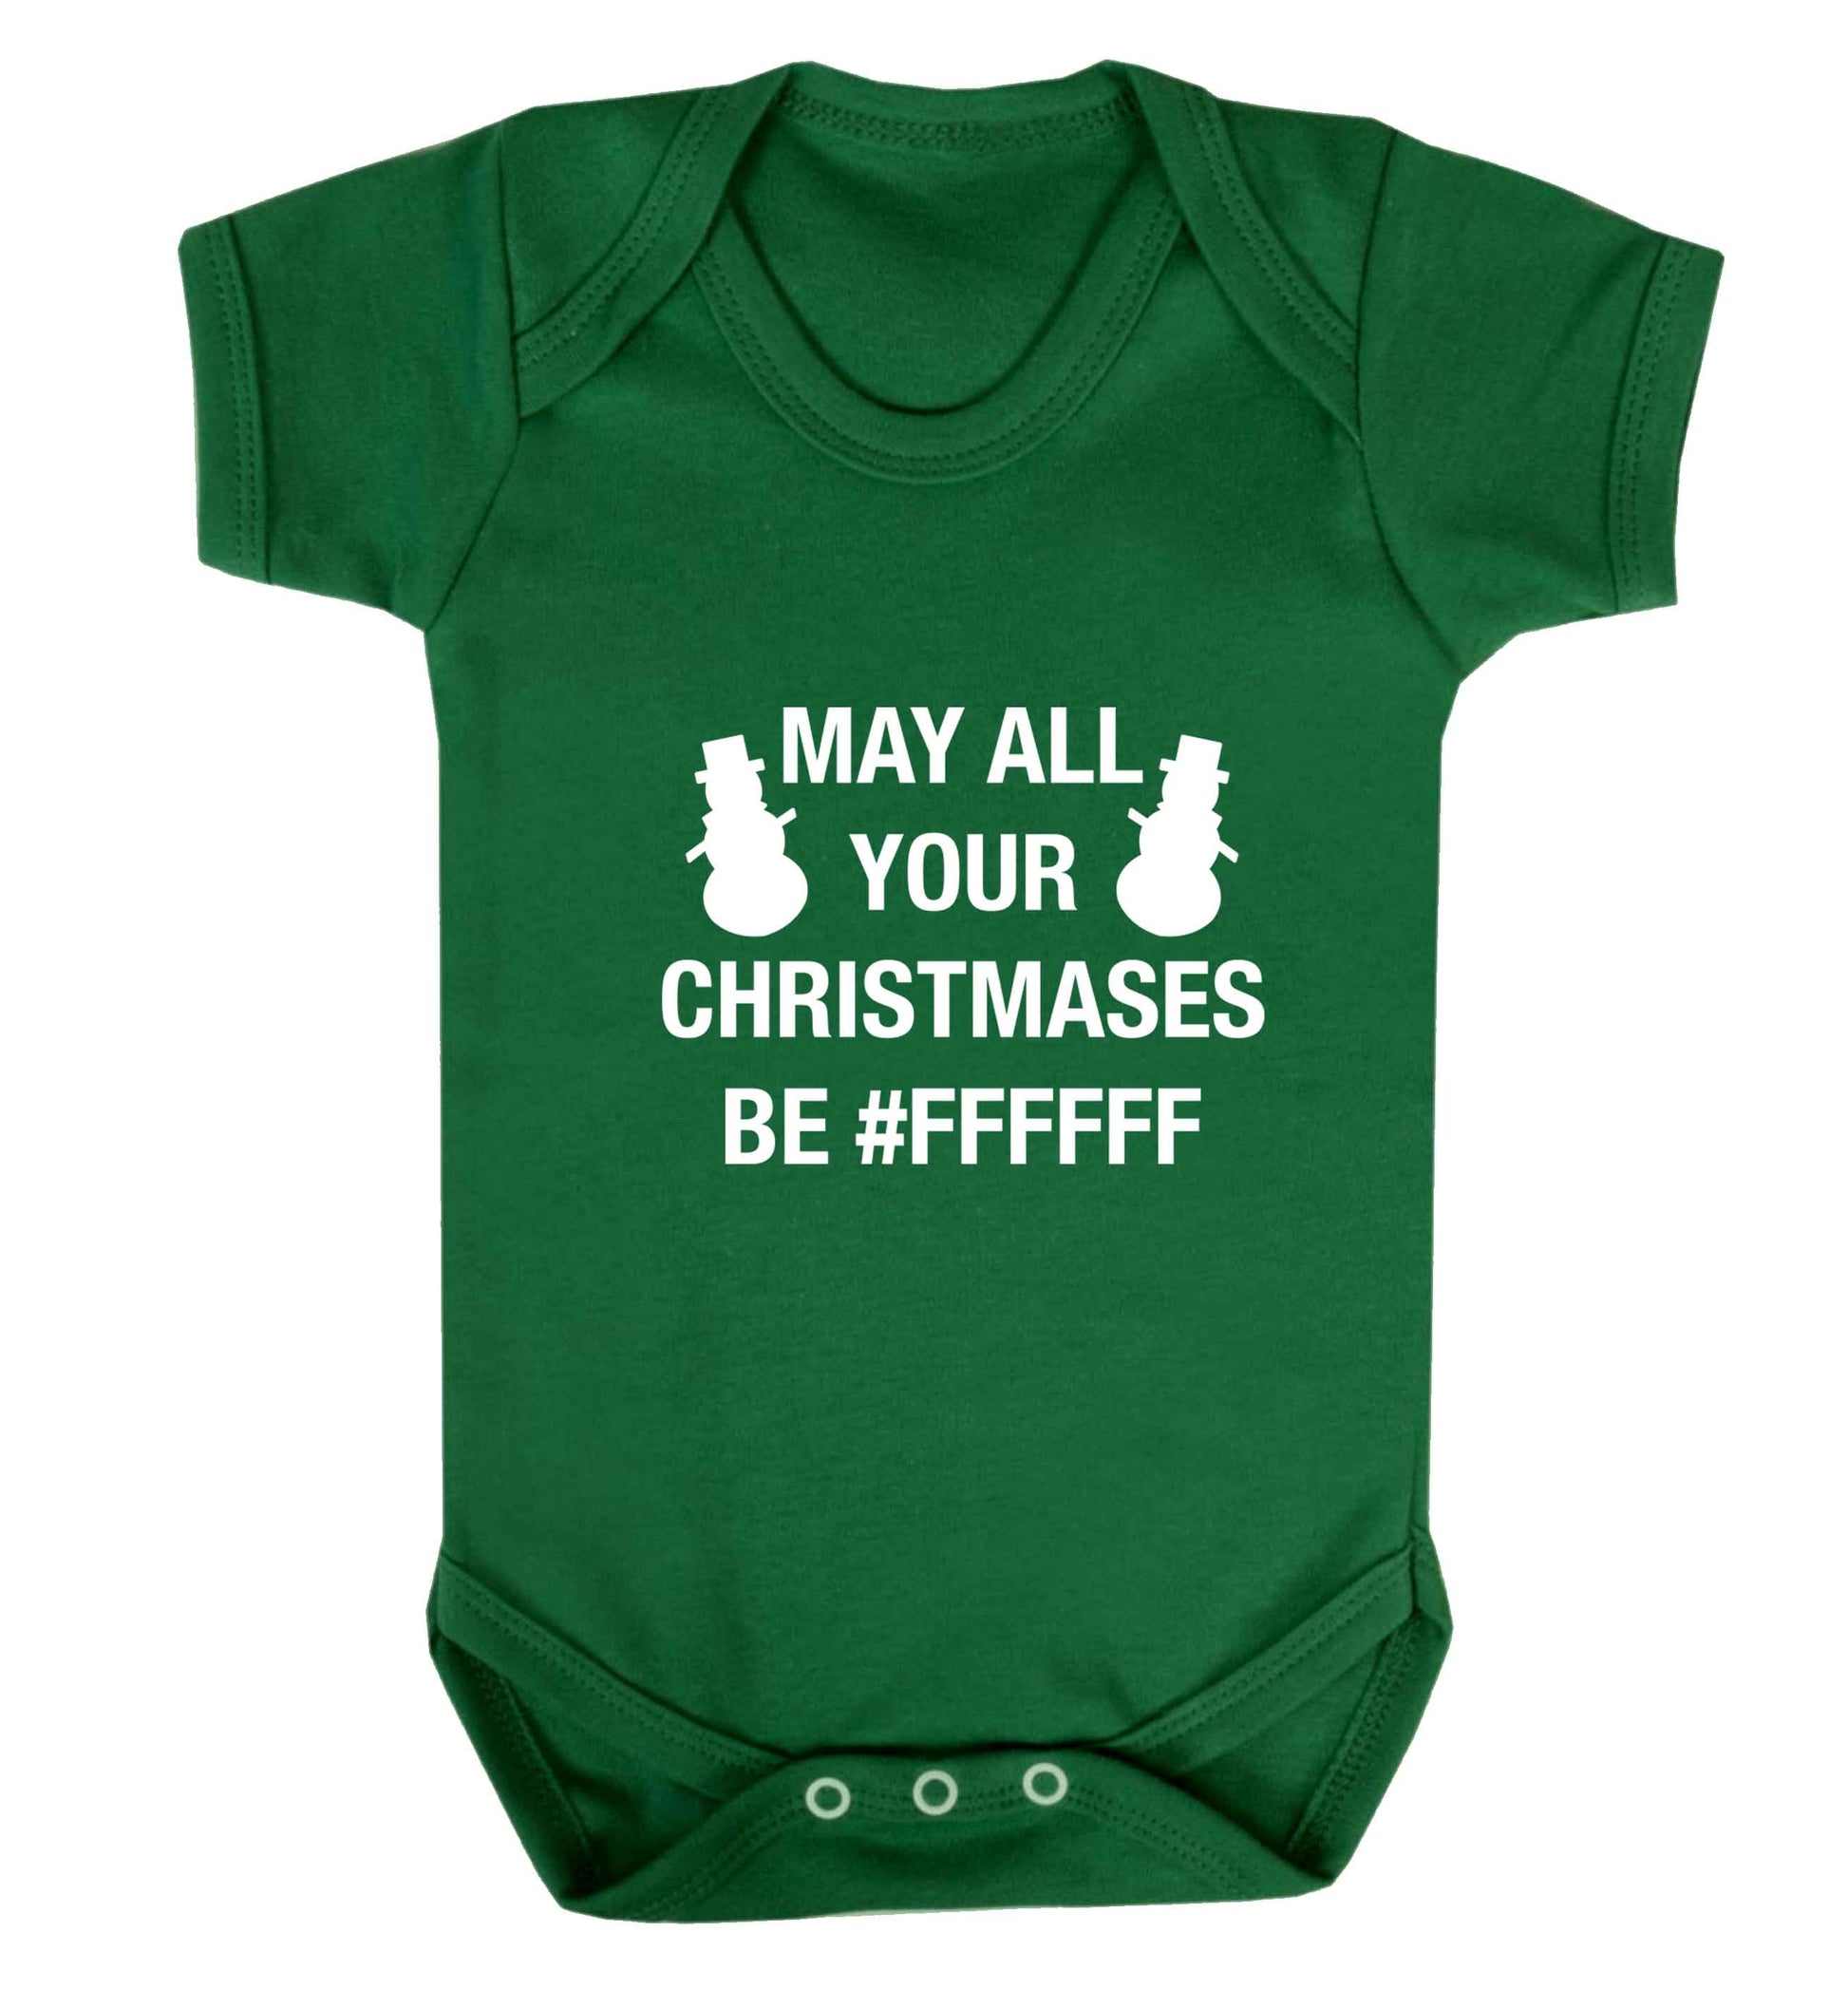 May all your Christmases be #FFFFFF baby vest green 18-24 months